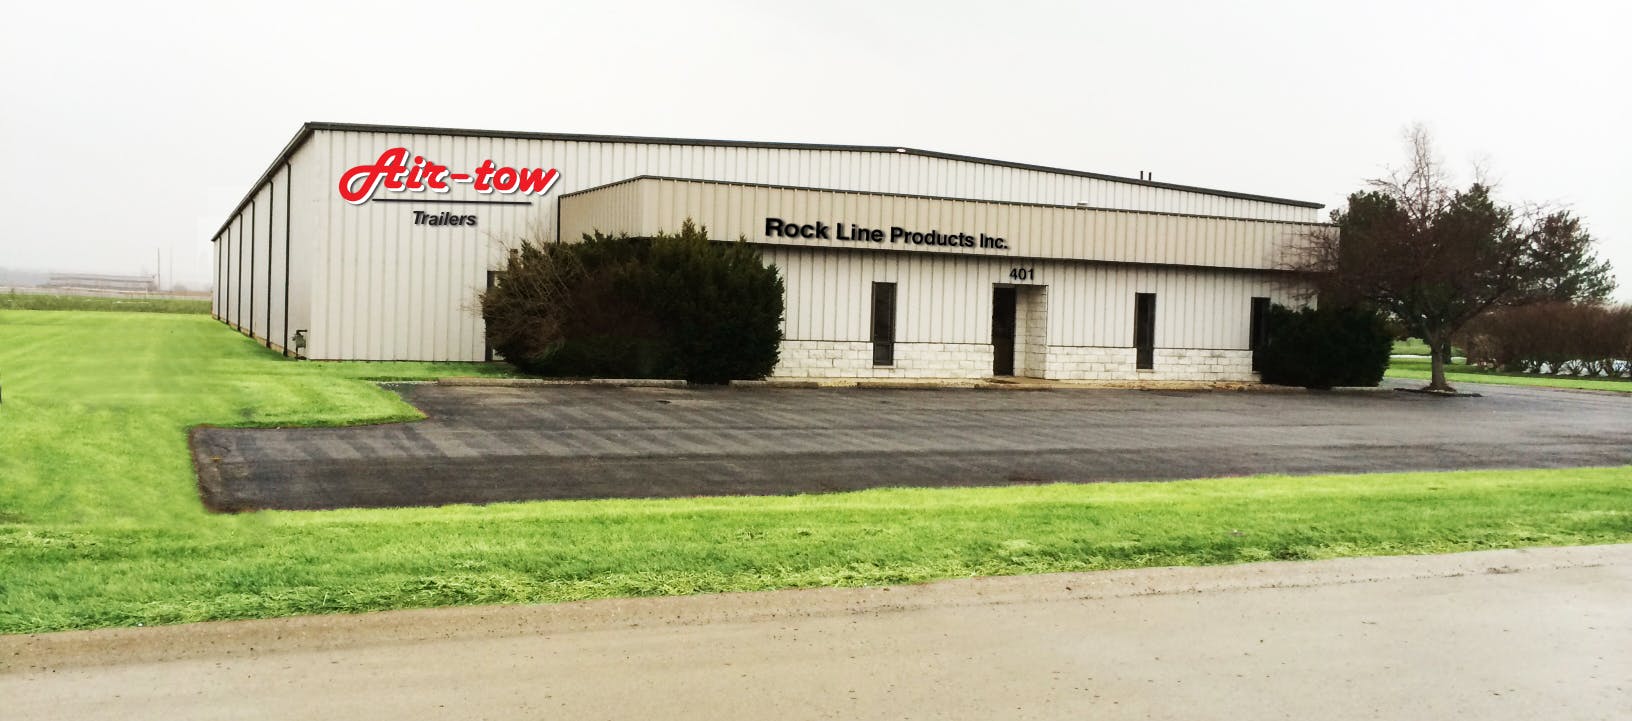 Airtow Trailers Adds Ohio Distribution Center | Construction News